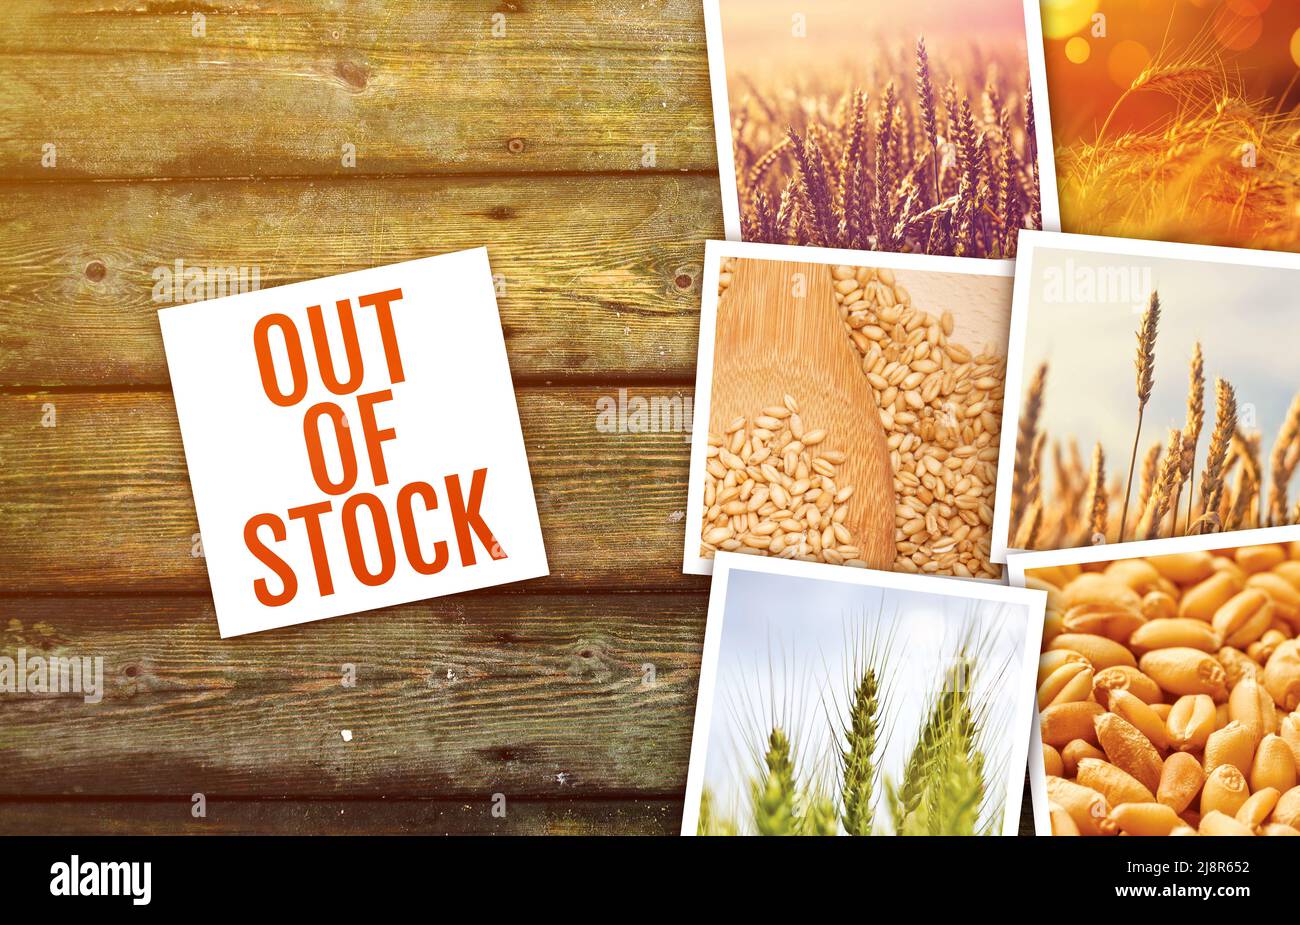 Wheat commodity out of stock concept with picture collage Stock Photo